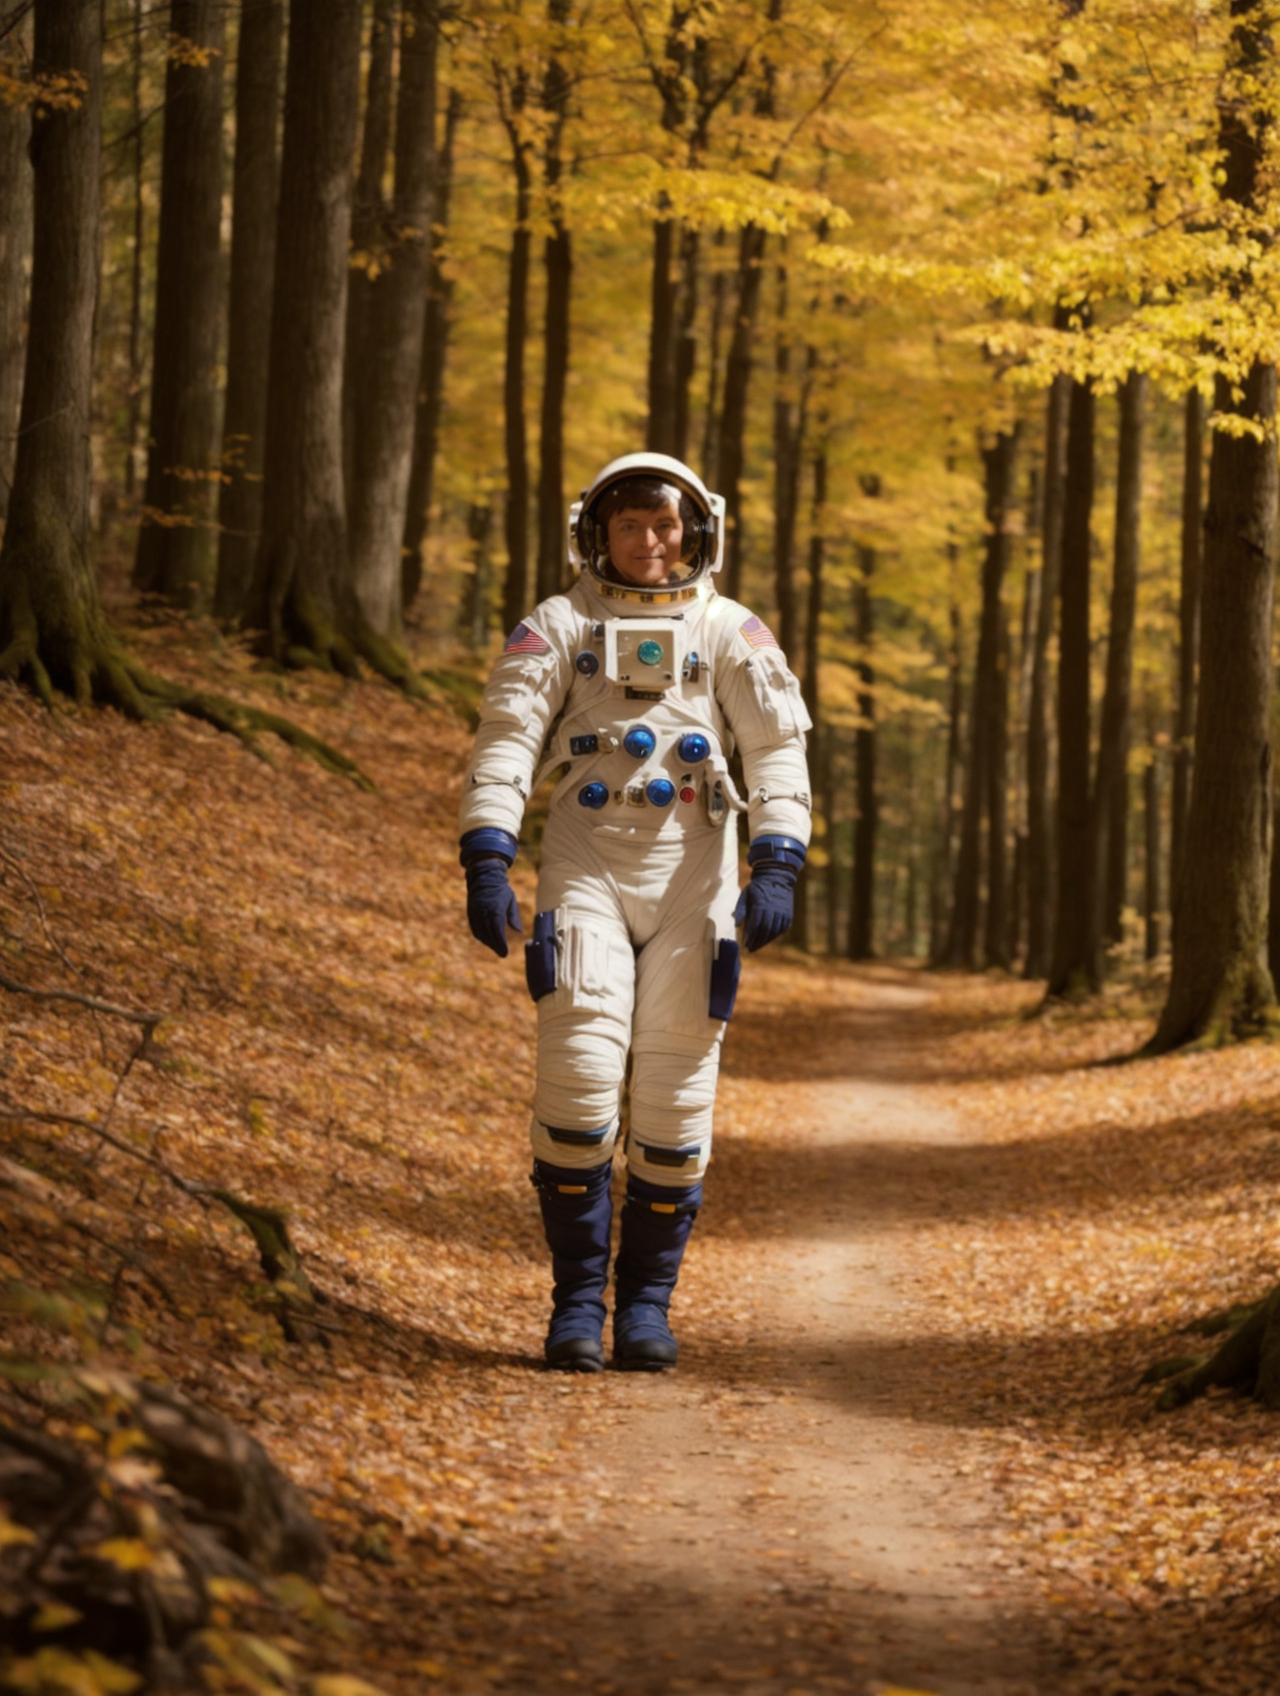 a photograph of An astronaut exploring a forest in autumn, rich colors, highly detailed, smooth, sharp focus